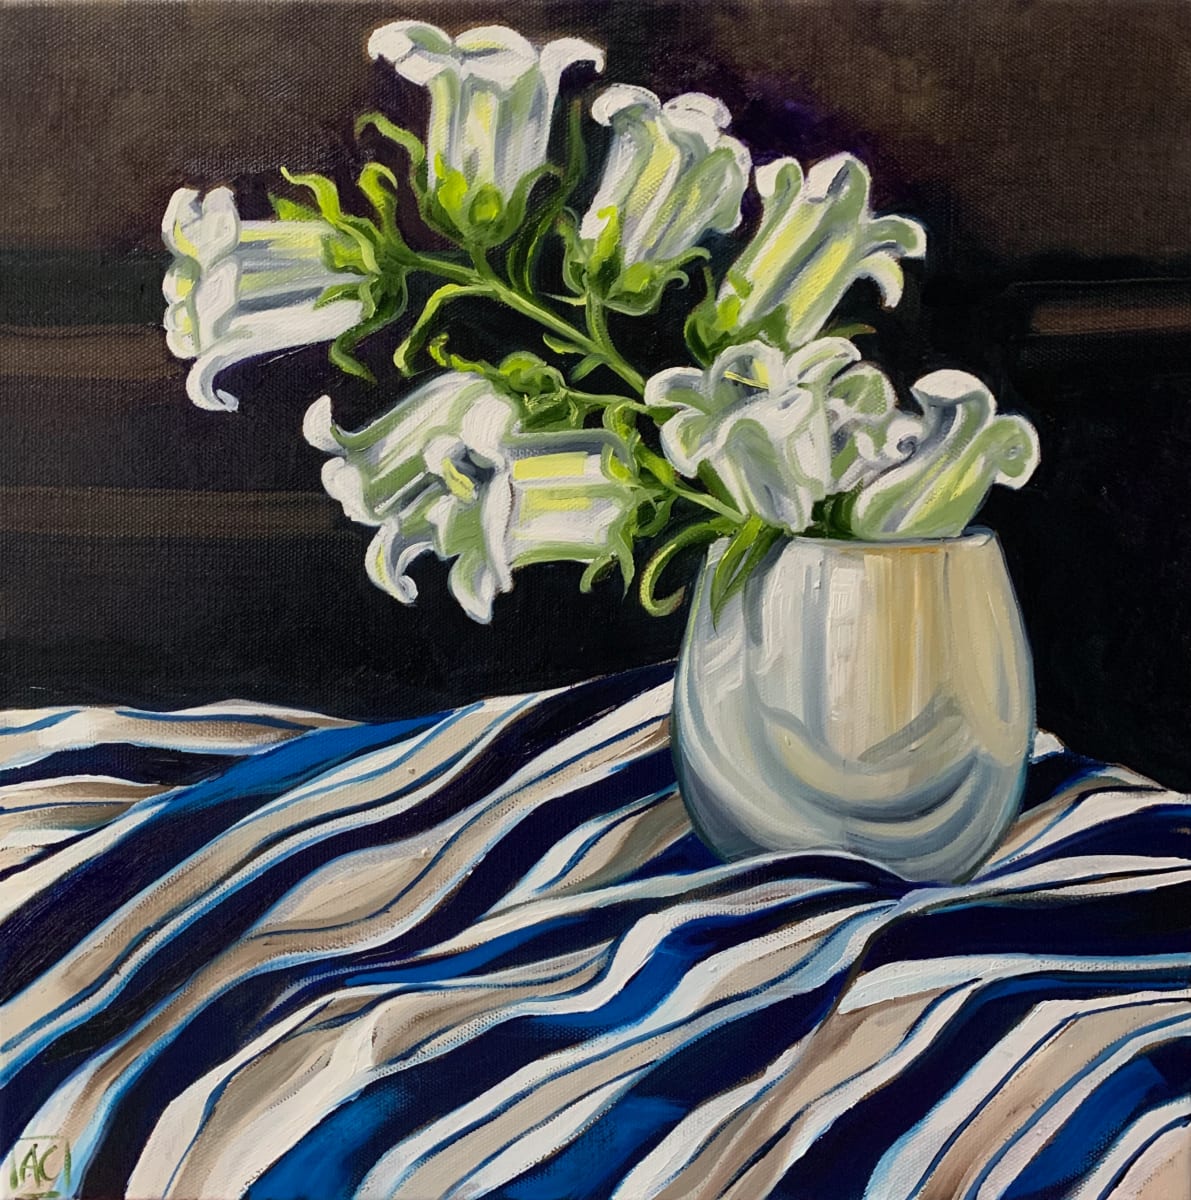 White Bell Flowers and Studio Stripes 